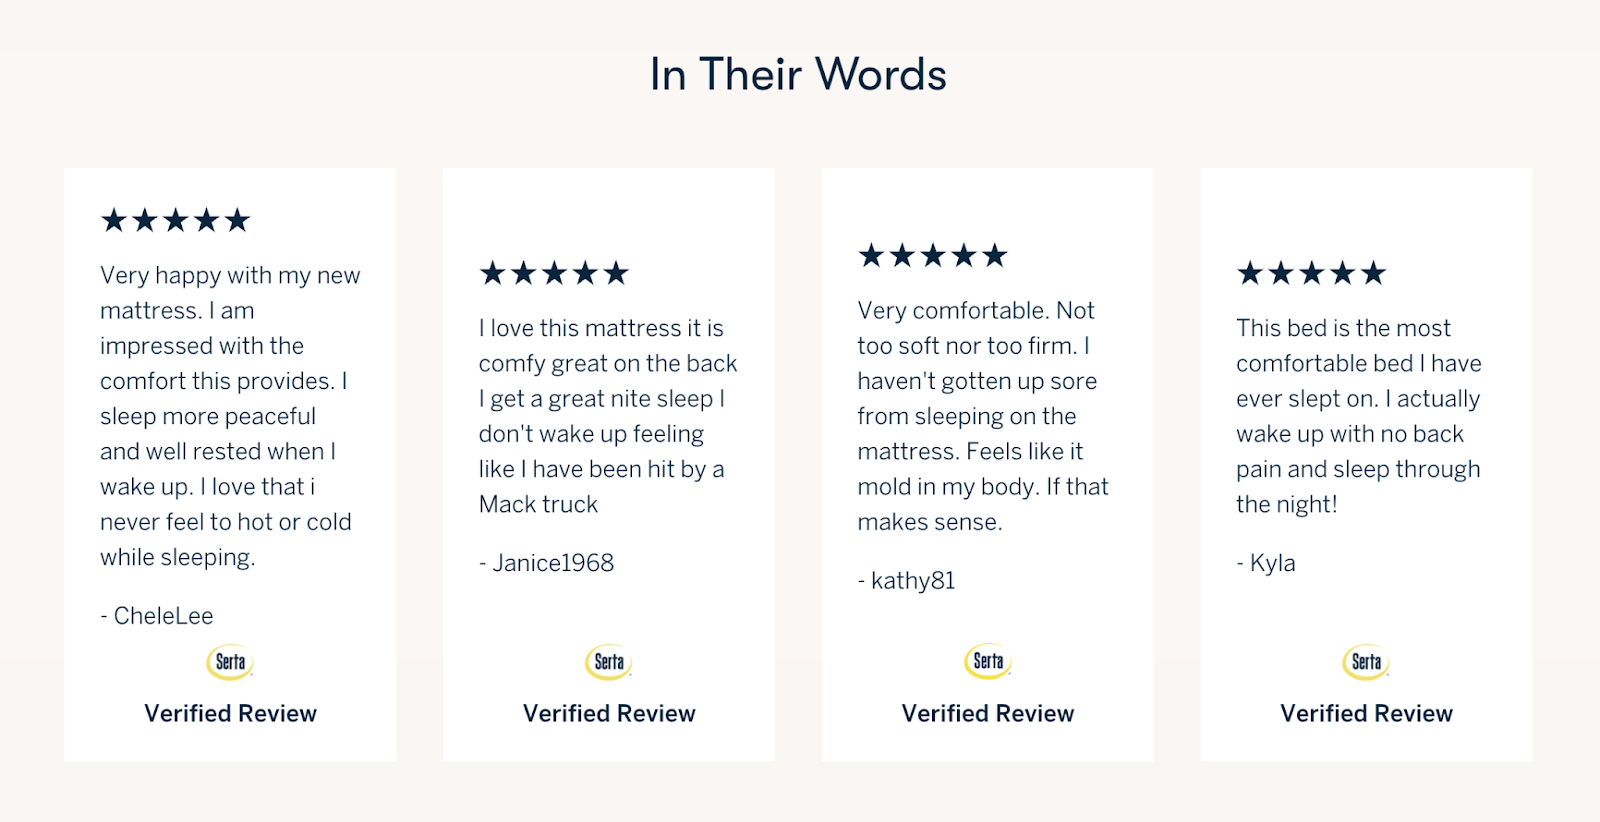 Customers reviews section of Serta's page